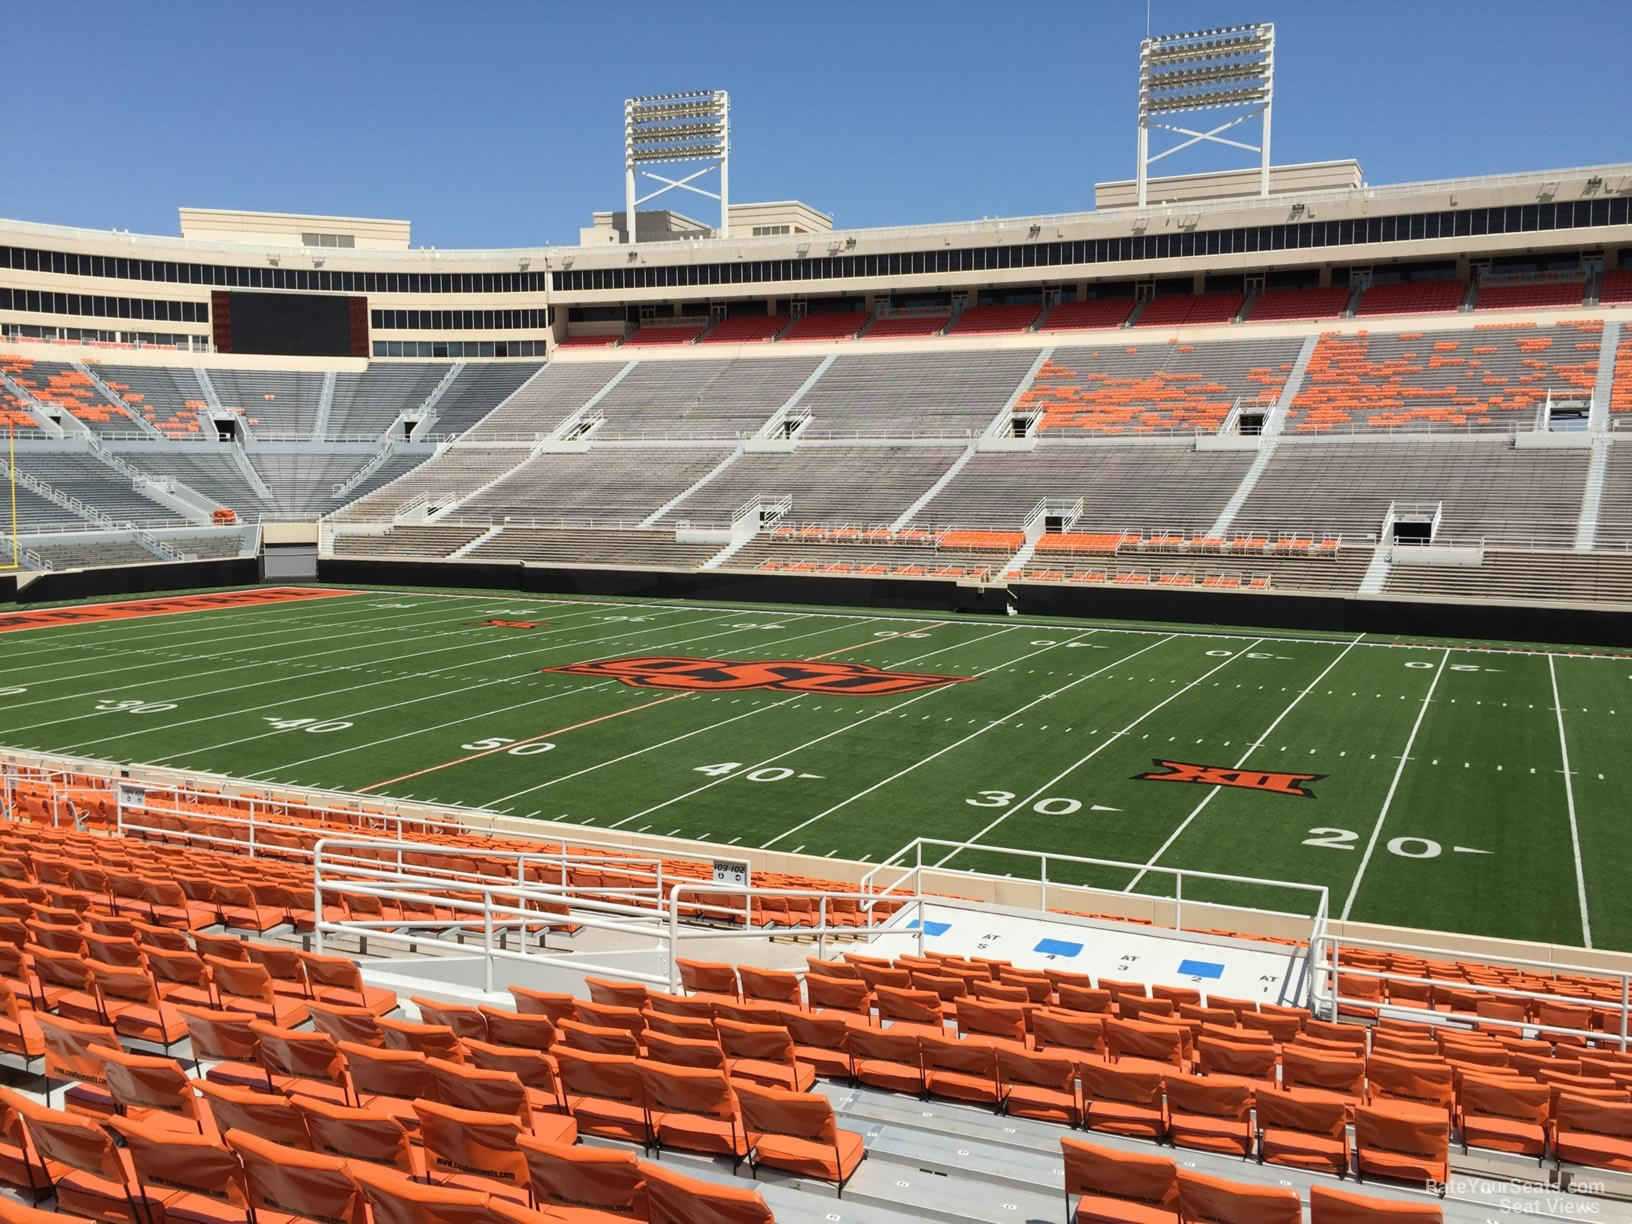 section 203, row 20 seat view  - boone pickens stadium